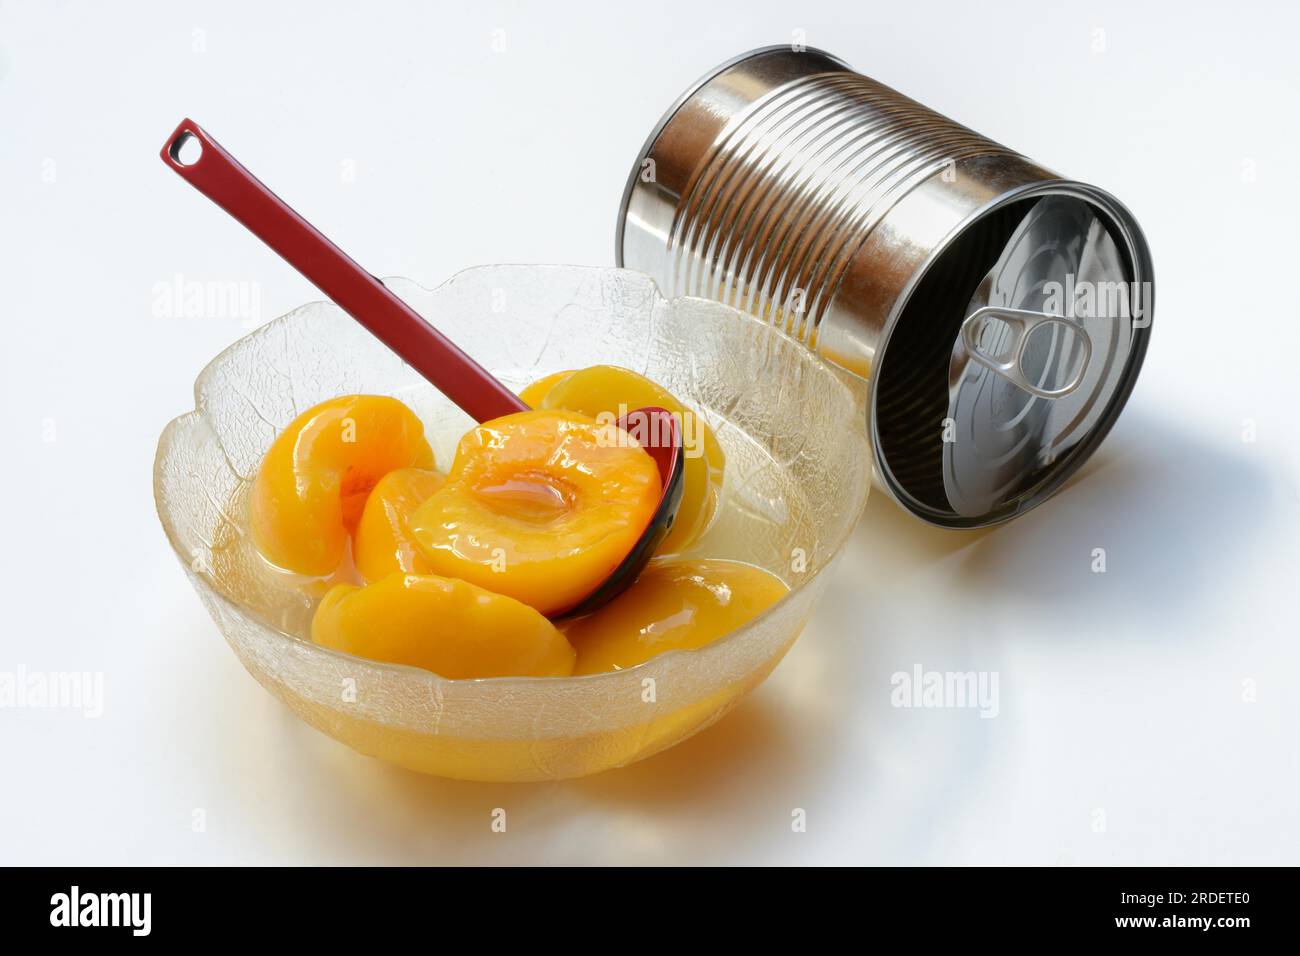 Peach, pickled peach halves in glass bowl with ladle and preserving tin Stock Photo